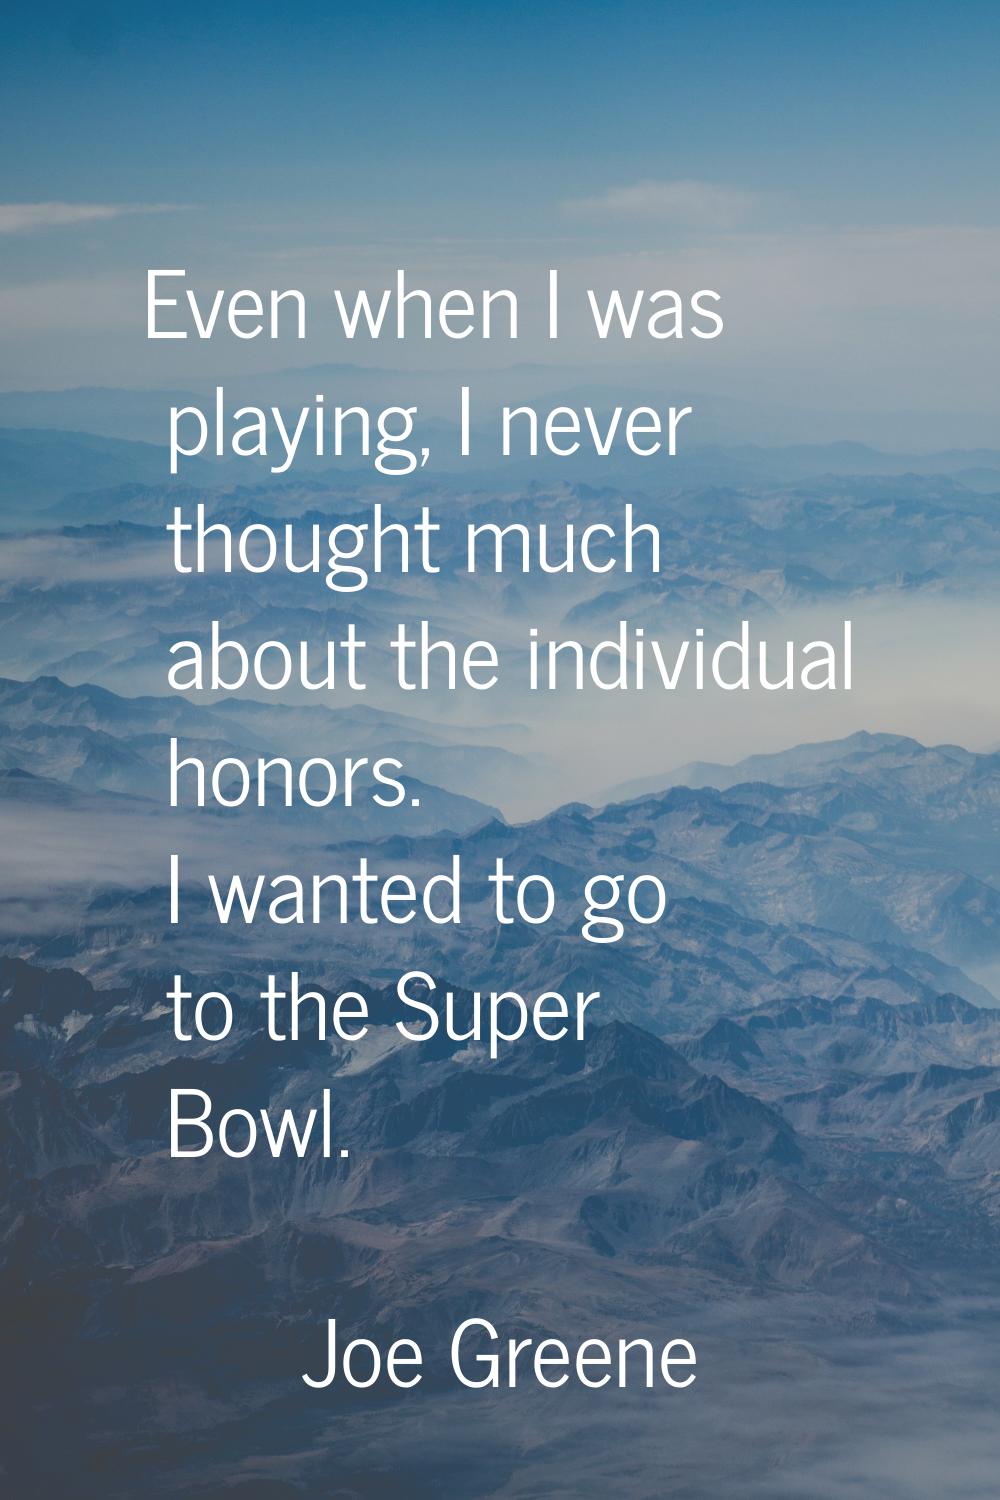 Even when I was playing, I never thought much about the individual honors. I wanted to go to the Su